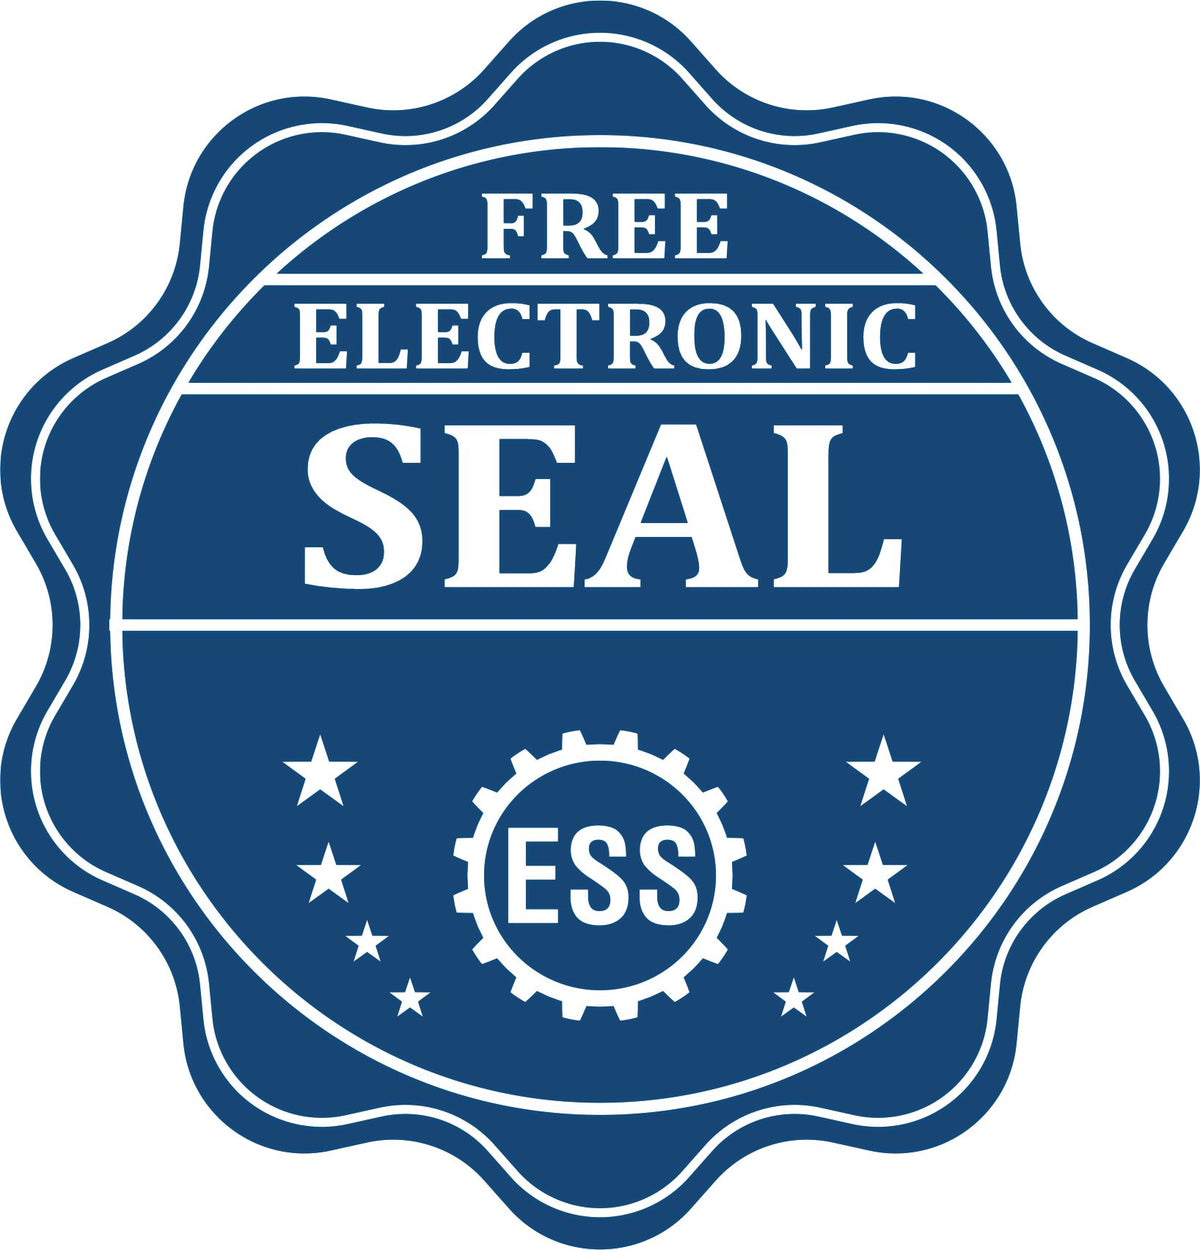 A badge showing a free electronic seal for the Slim Pre-Inked State Seal Notary Stamp for Minnesota with stars and the ESS gear on the emblem.